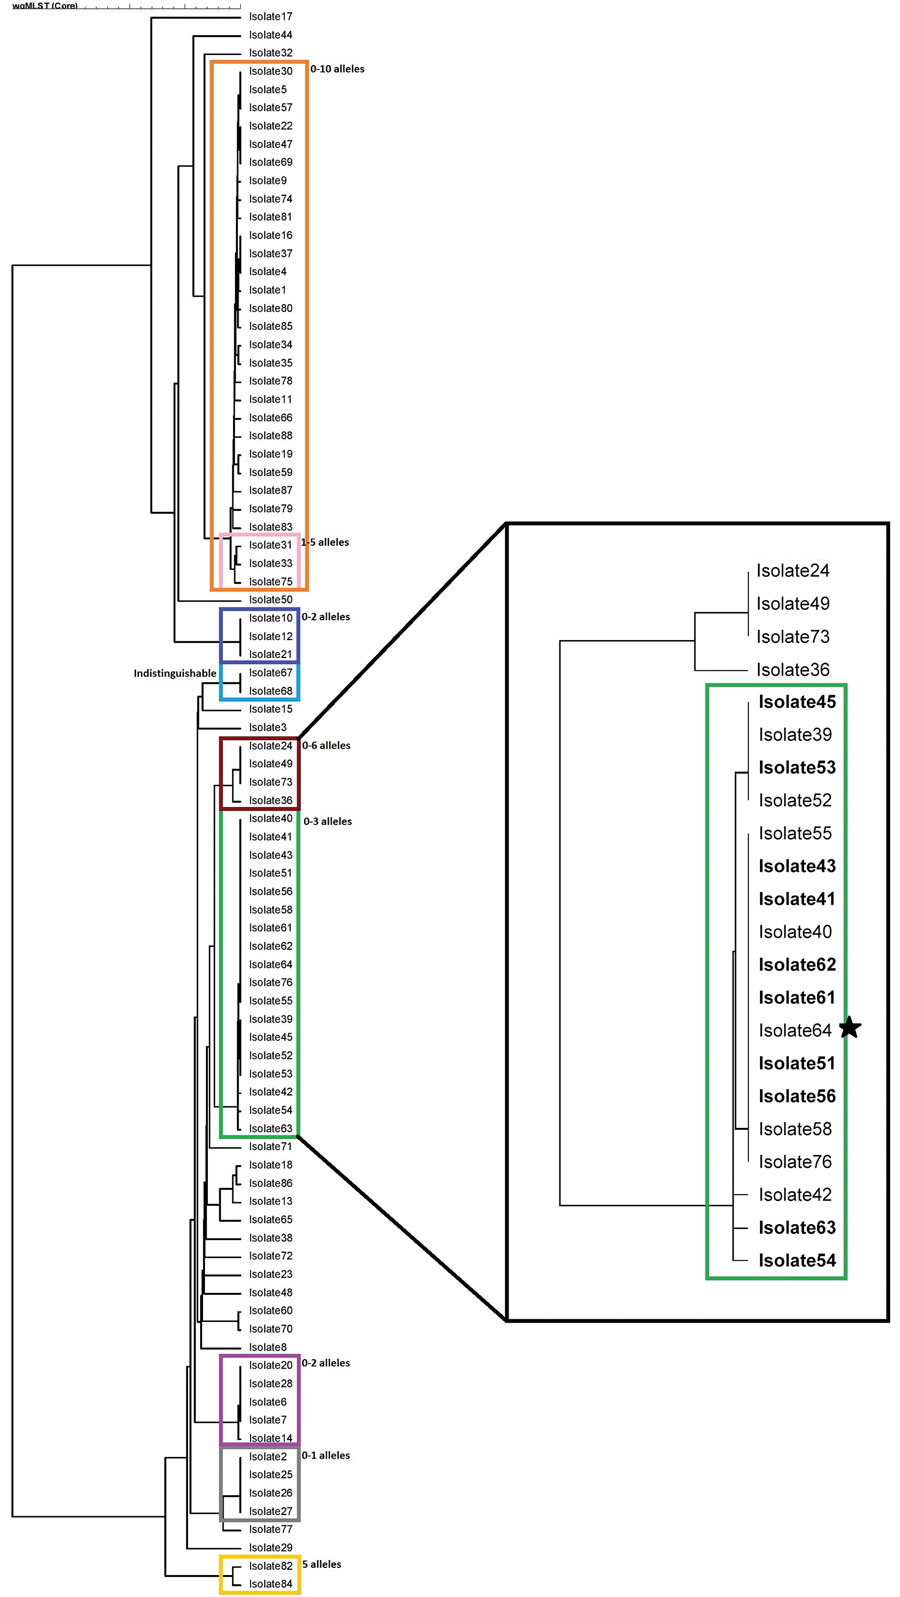 Phylogenetic tree for Salmonella enterica serotype Enteritidis isolates from outbreak in Massachusetts, USA, 2018. The colored boxes on the left indicate 9 separate subclusters for the entire 84-isolate cluster, with confirmation of allele differences coming from PulseNet (https://www.cdc.gov/pulsenet/index.html). Eight subclusters yielded no epidemiologic data, resulting in the closure of those clusters. The ninth subcluster, in the green box (right), contains the isolates associated with the r